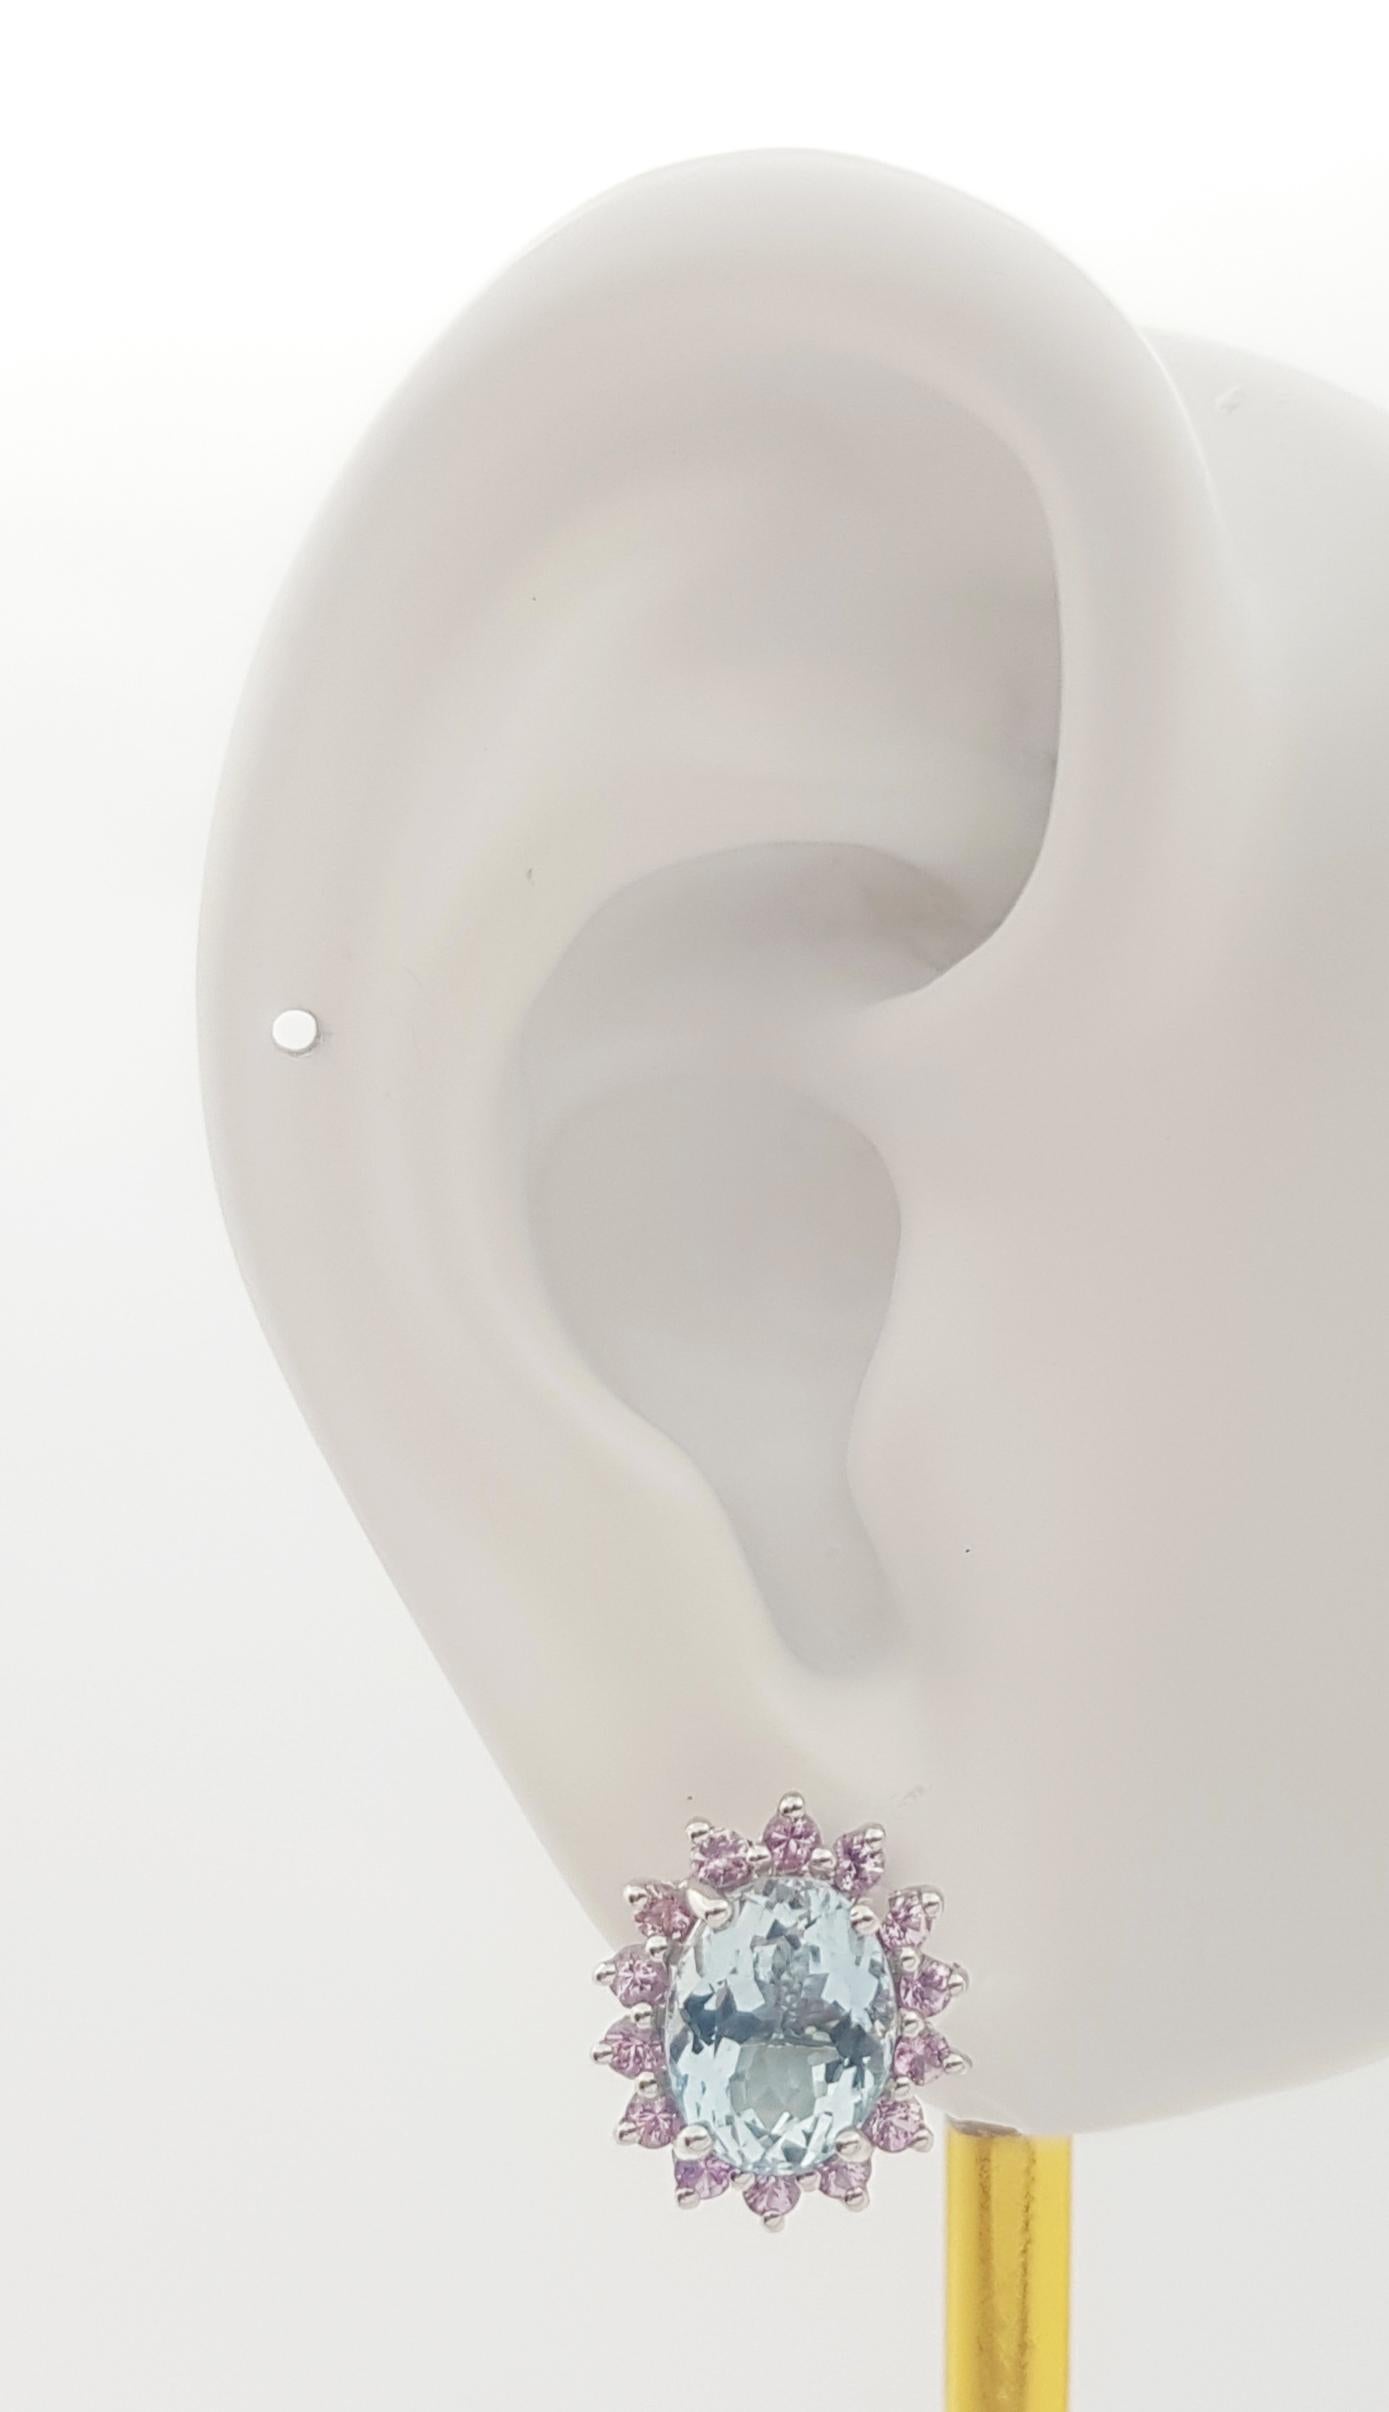 Aquamarine 3.52 carats with Pink Sapphire 0.87 carat Earrings set in 14K White Gold Settings

Width: 1.2 cm 
Length: 1.3 cm
Total Weight: 6.32 grams

